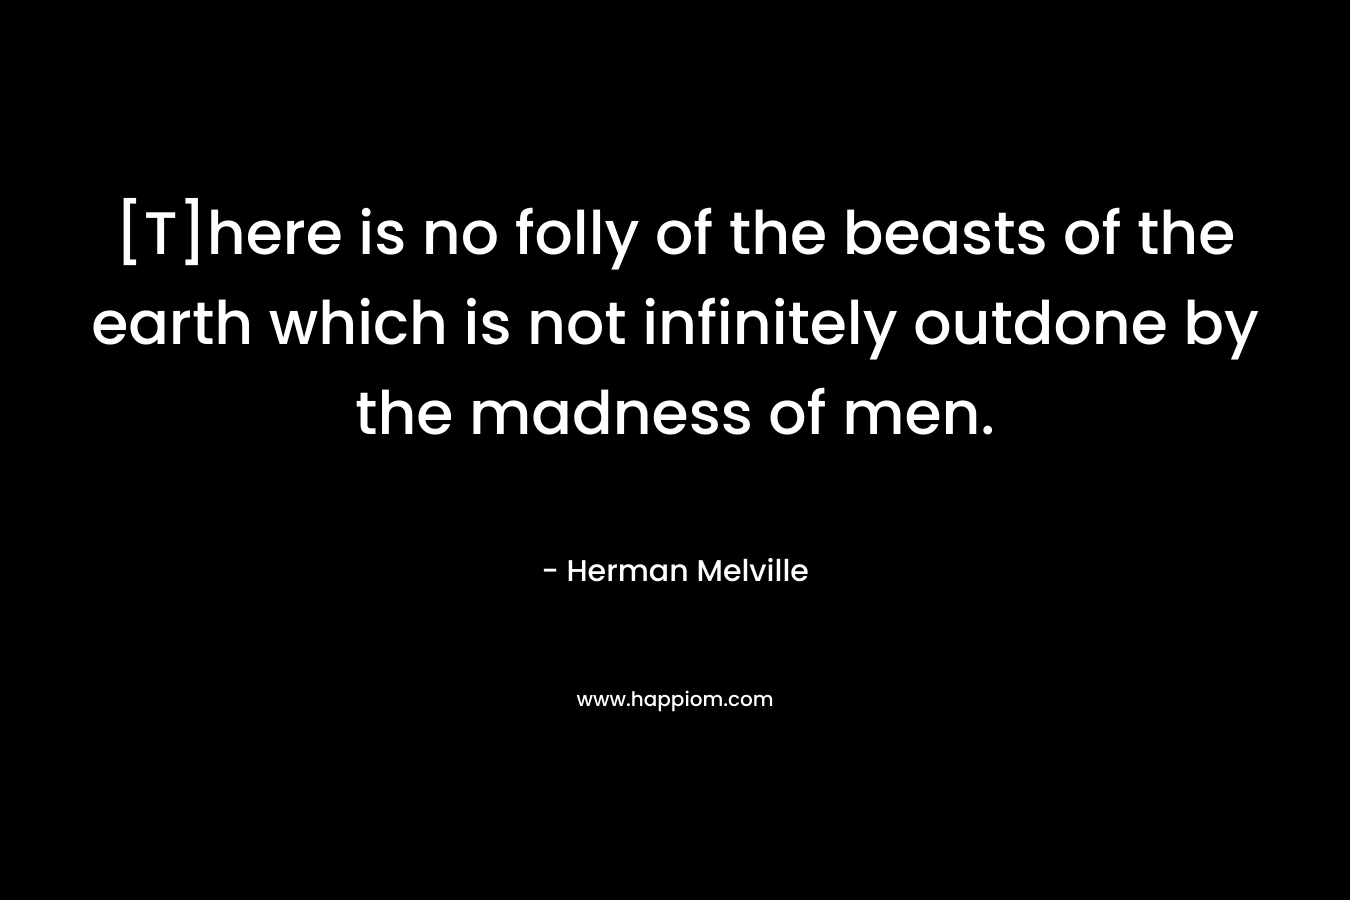 [T]here is no folly of the beasts of the earth which is not infinitely outdone by the madness of men. – Herman Melville